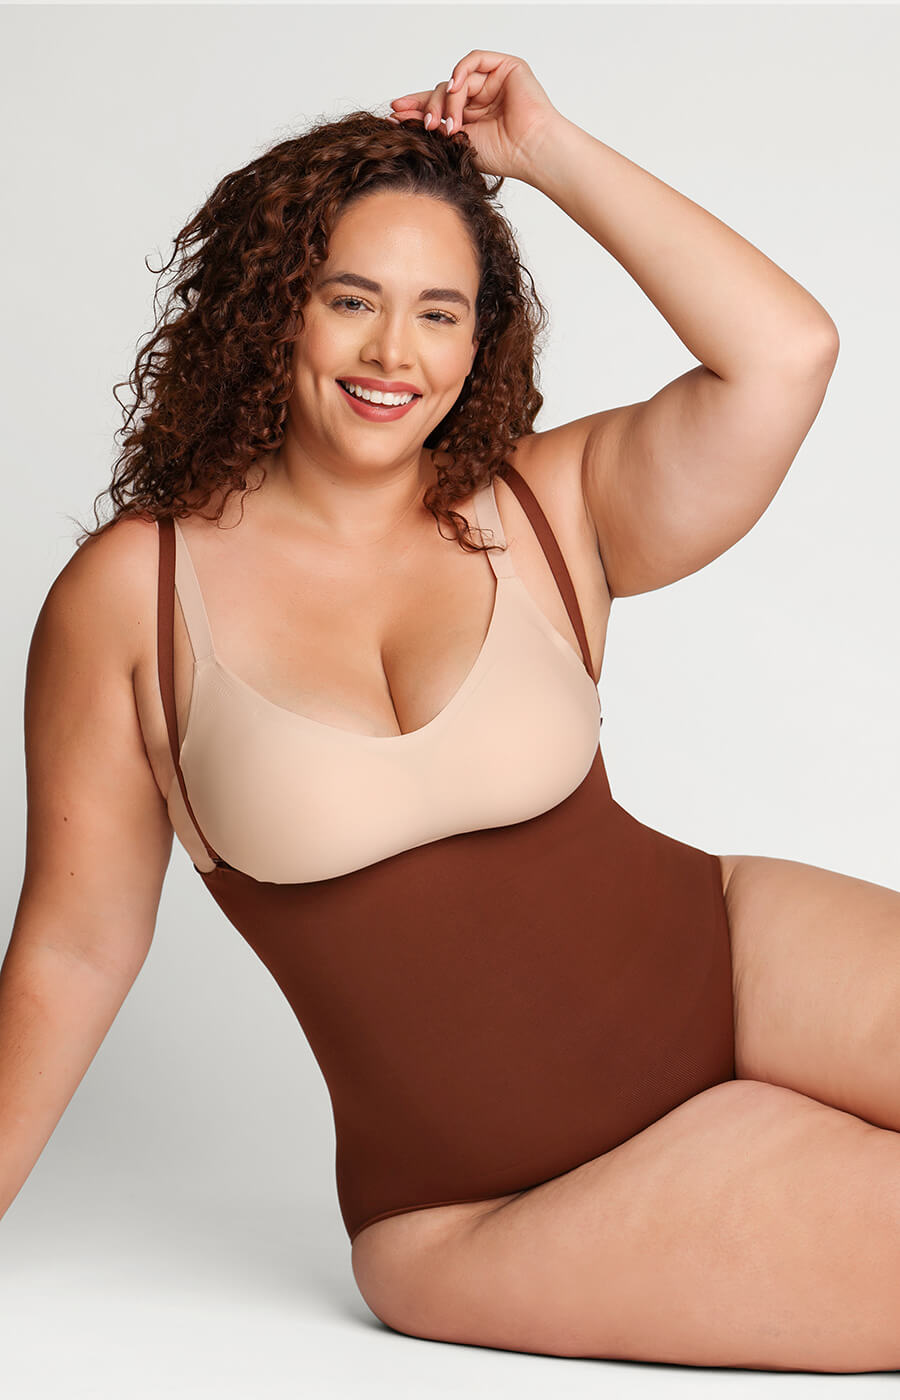 Feel Stylish and Confident in Shapellx Shapewear